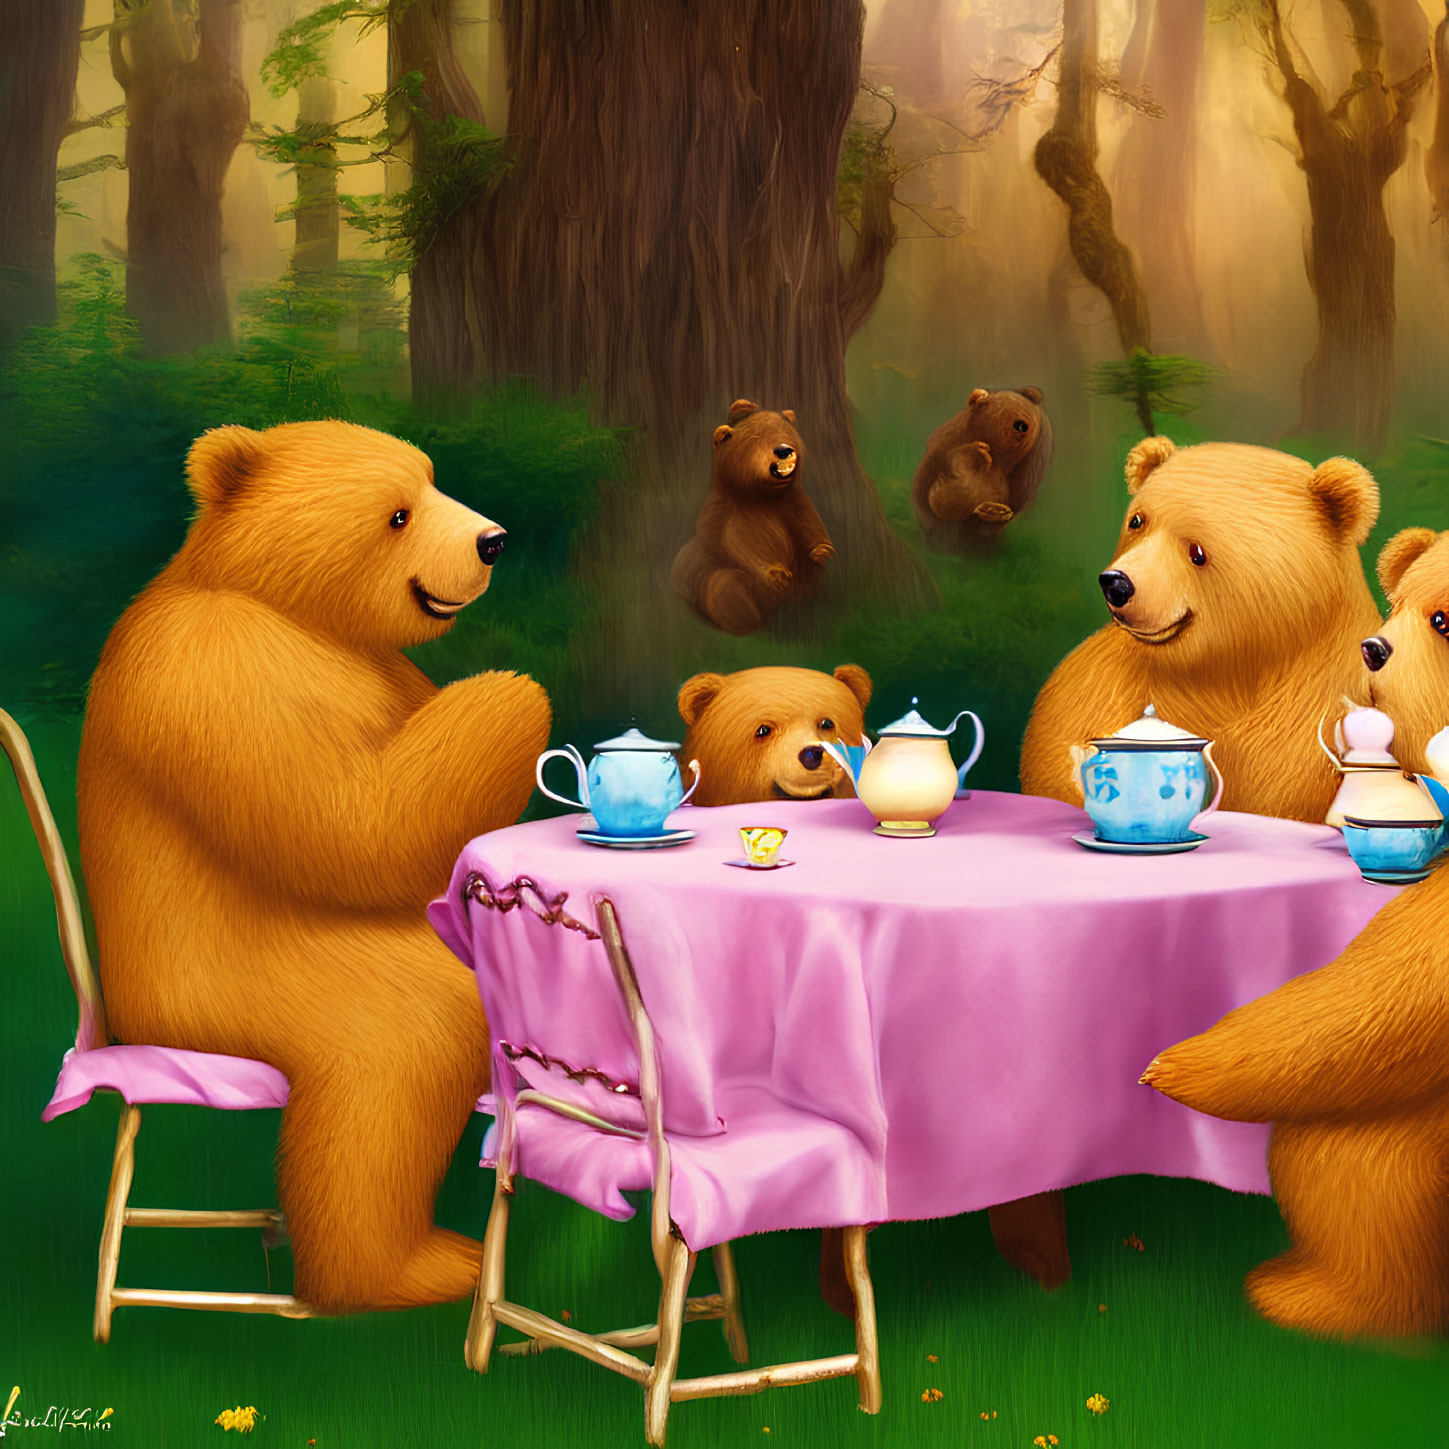 Whimsical forest tea party with animated bears